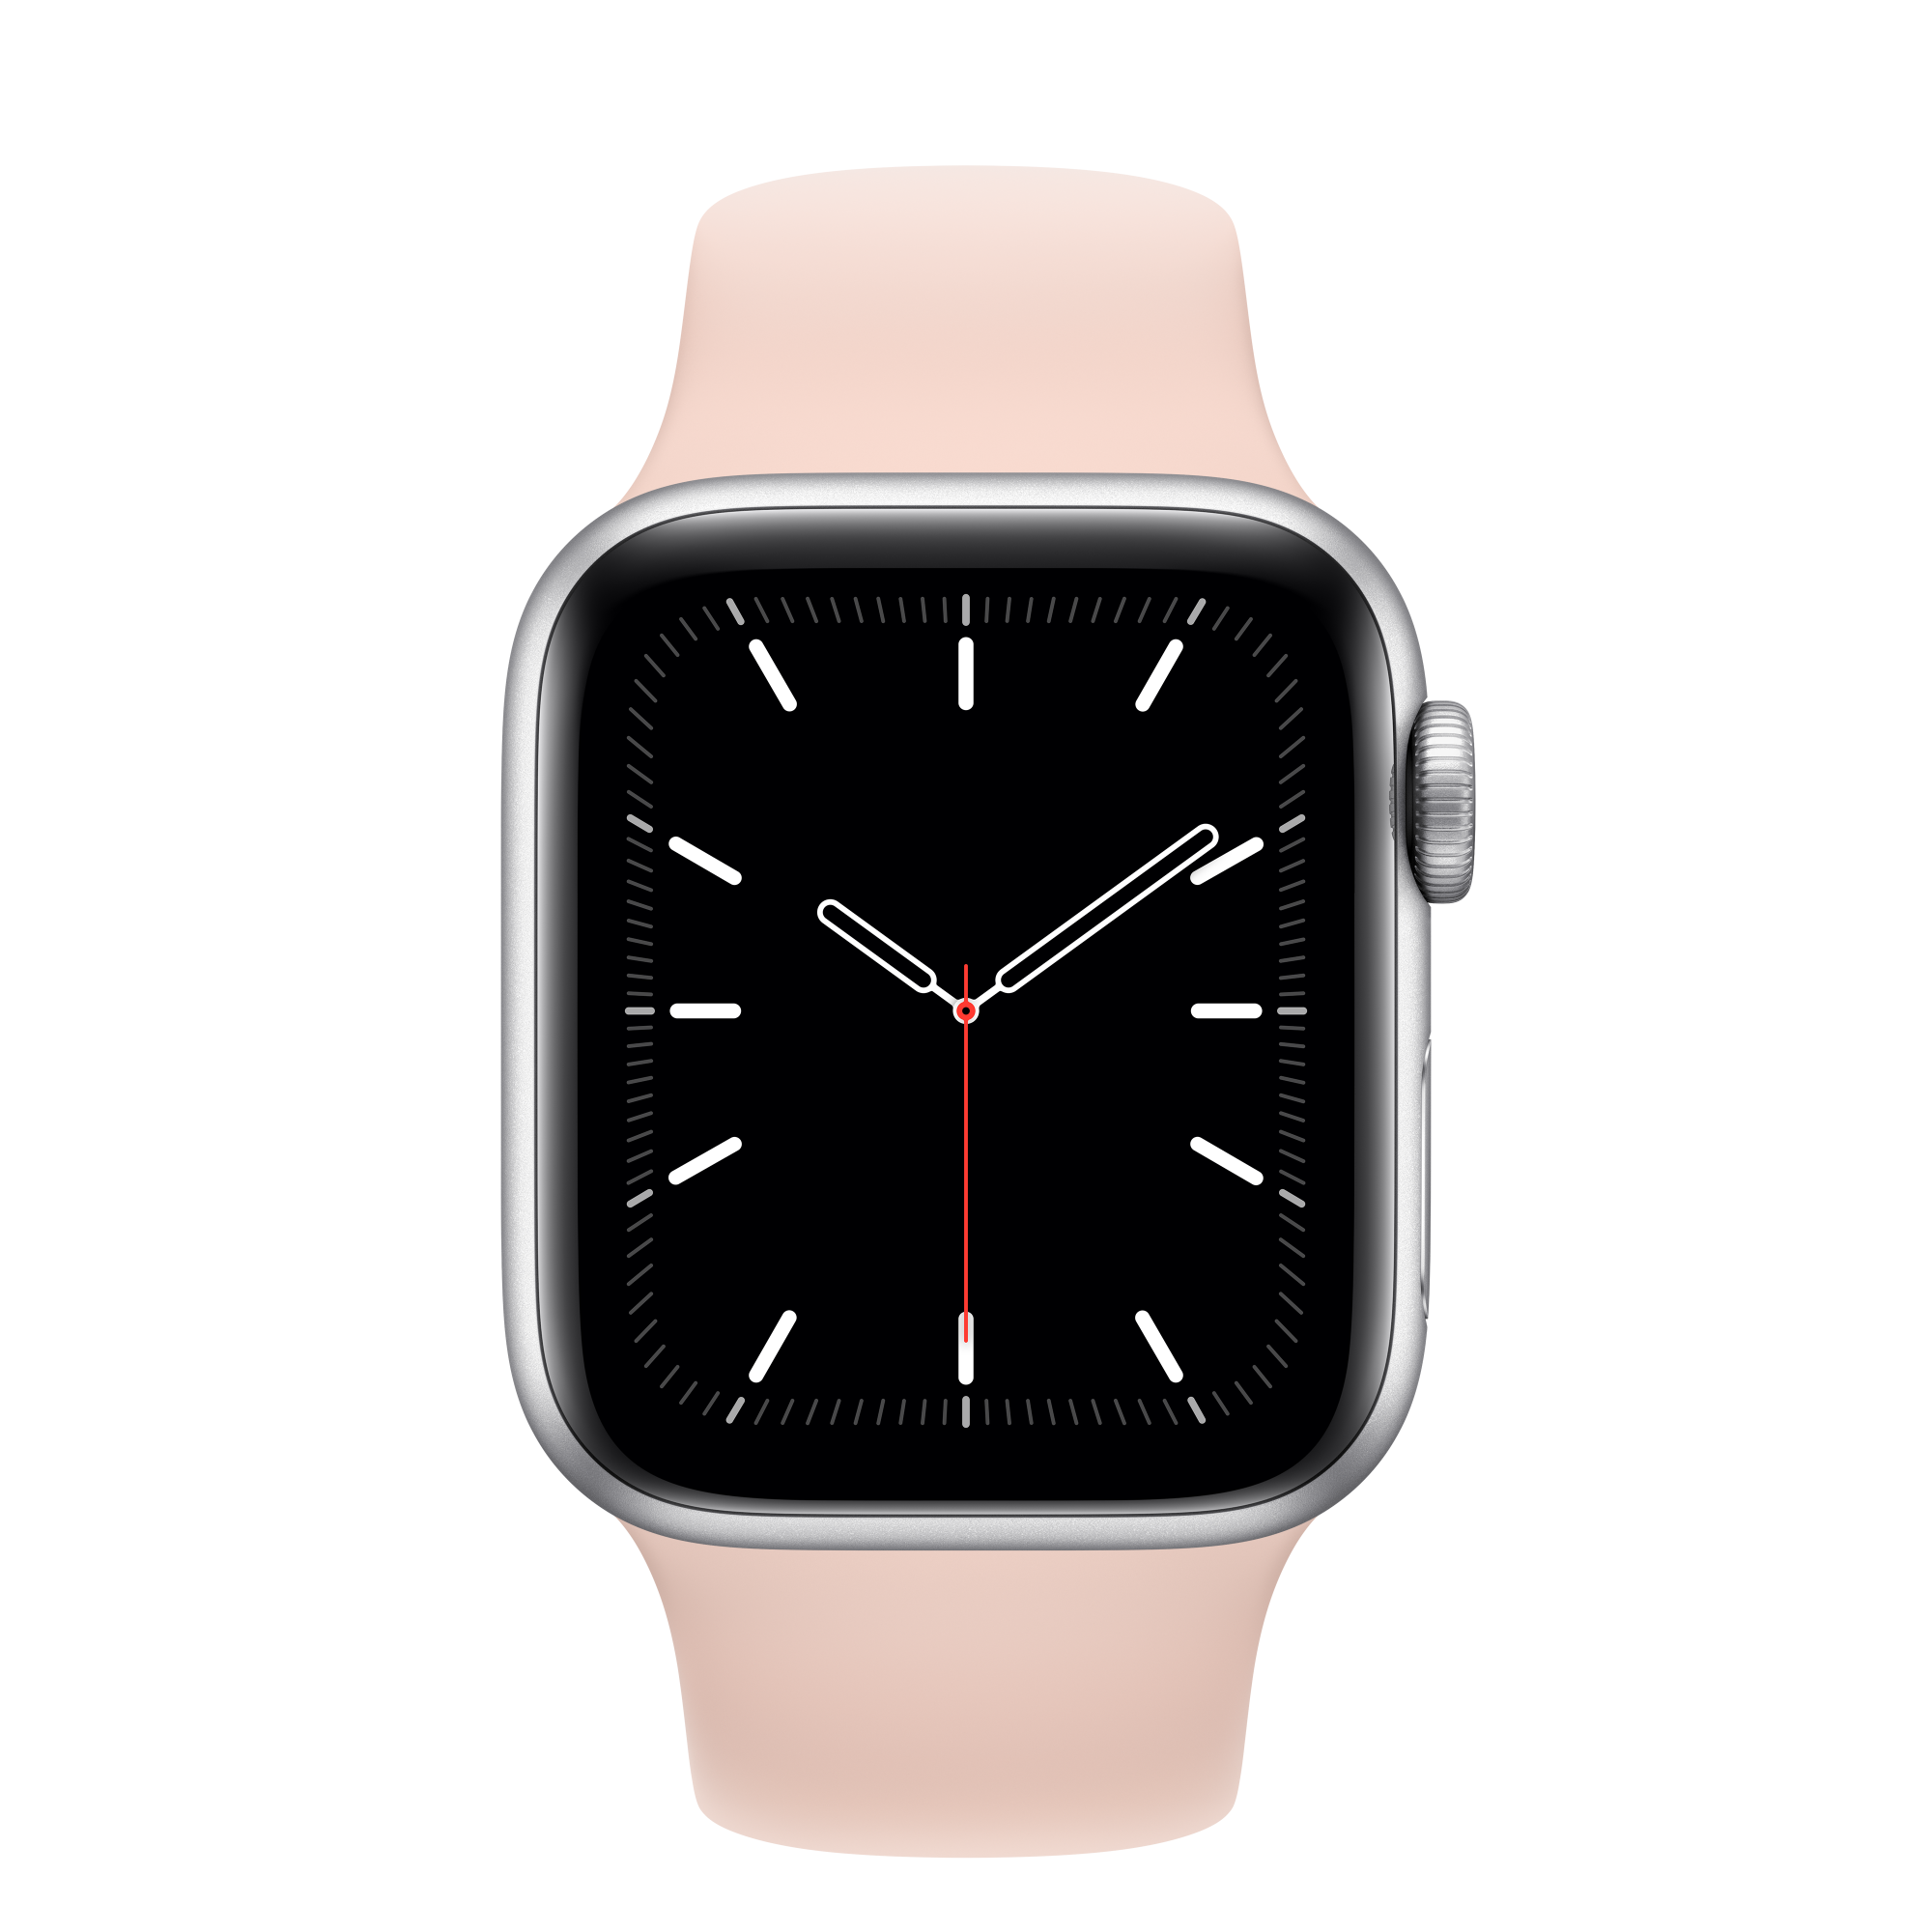 Apple Watch PNG Background Image